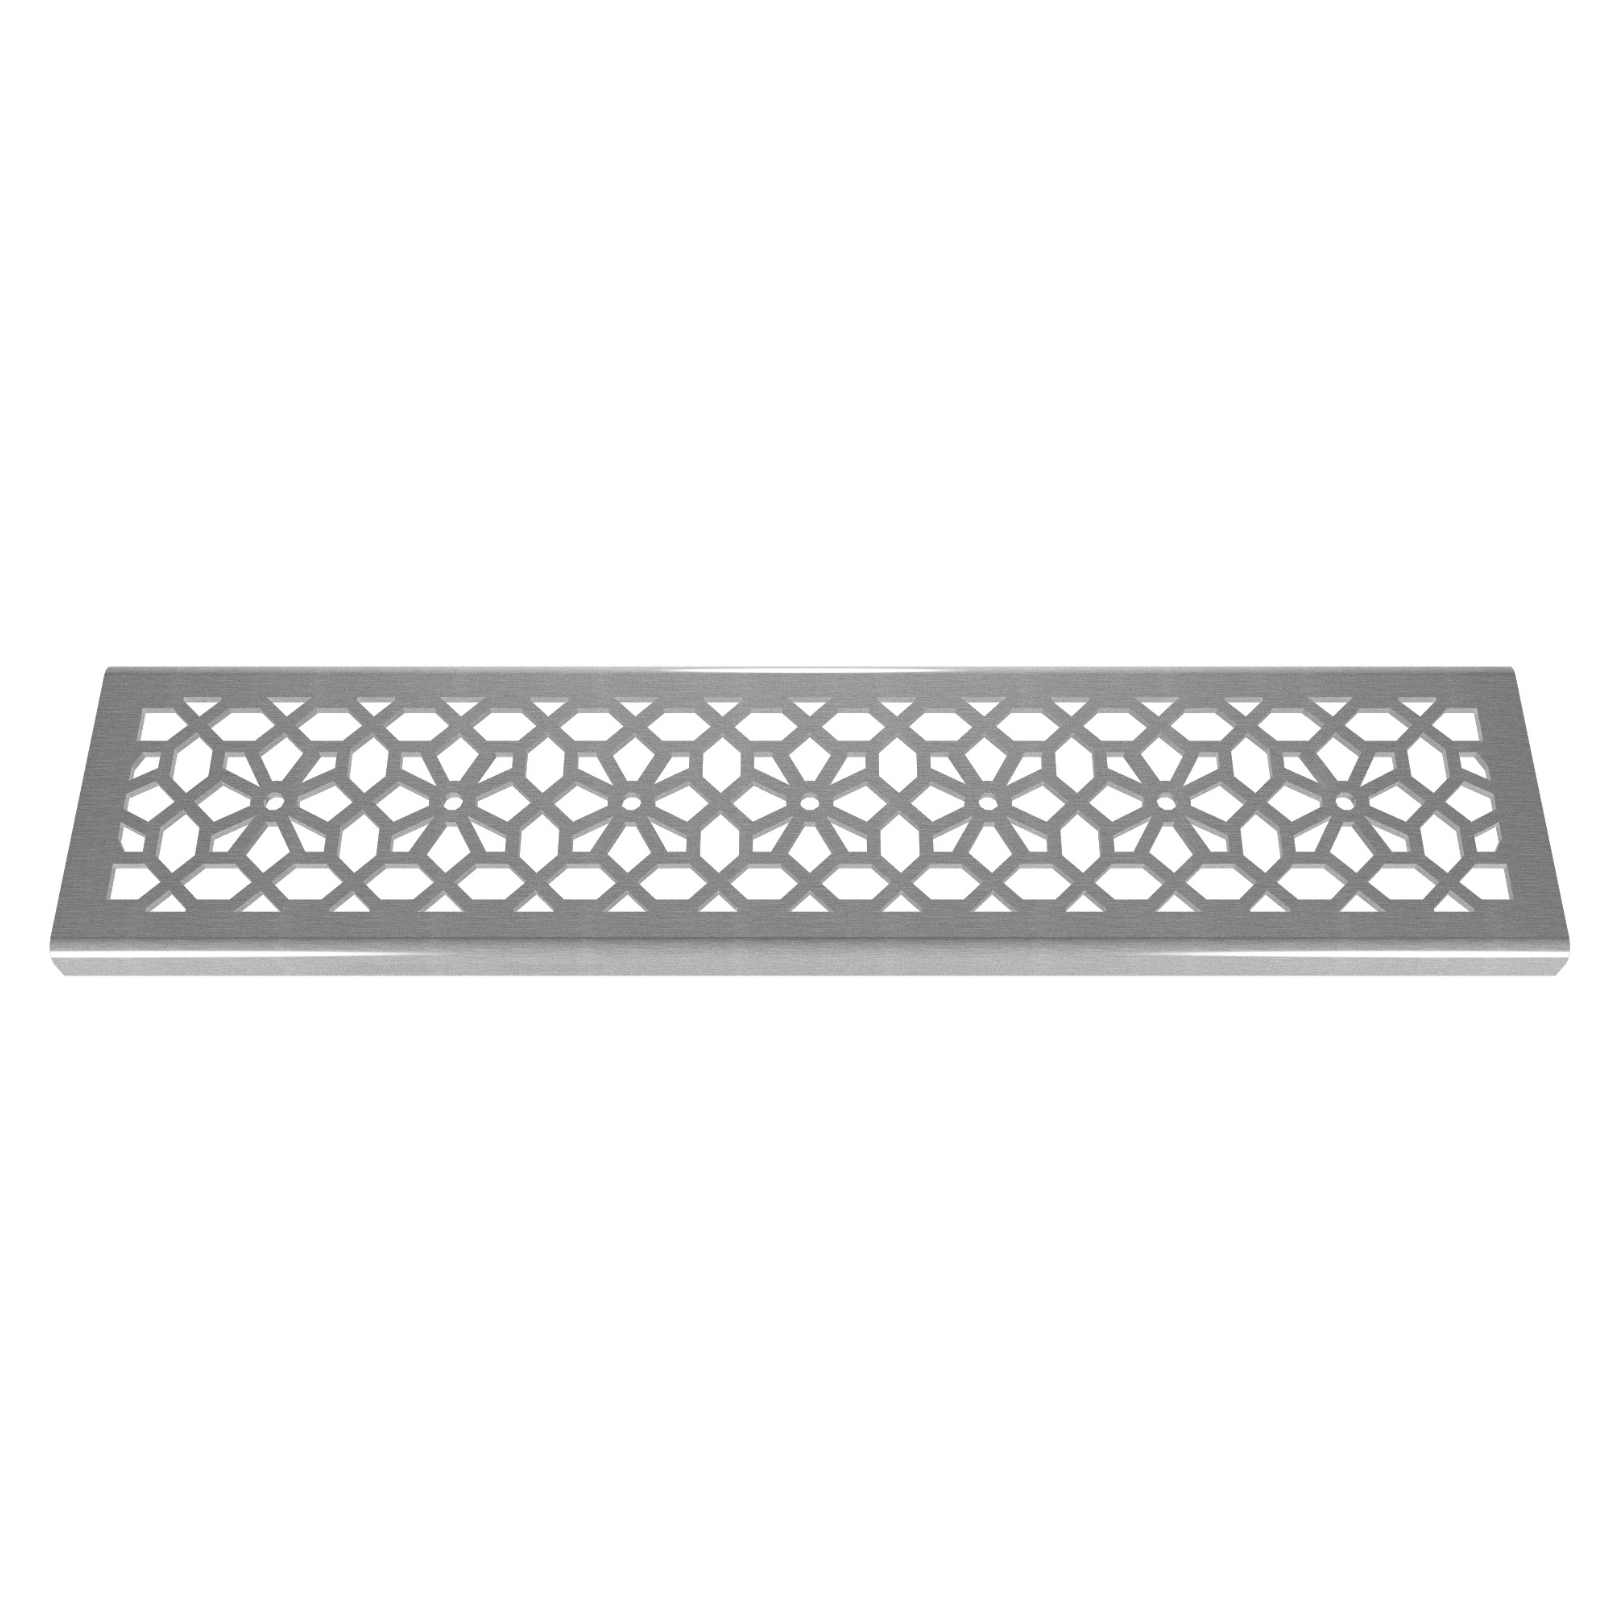 Blossom Stainless Steel 304 Channel Drain Grate 69 x 913mm (3 Inch)